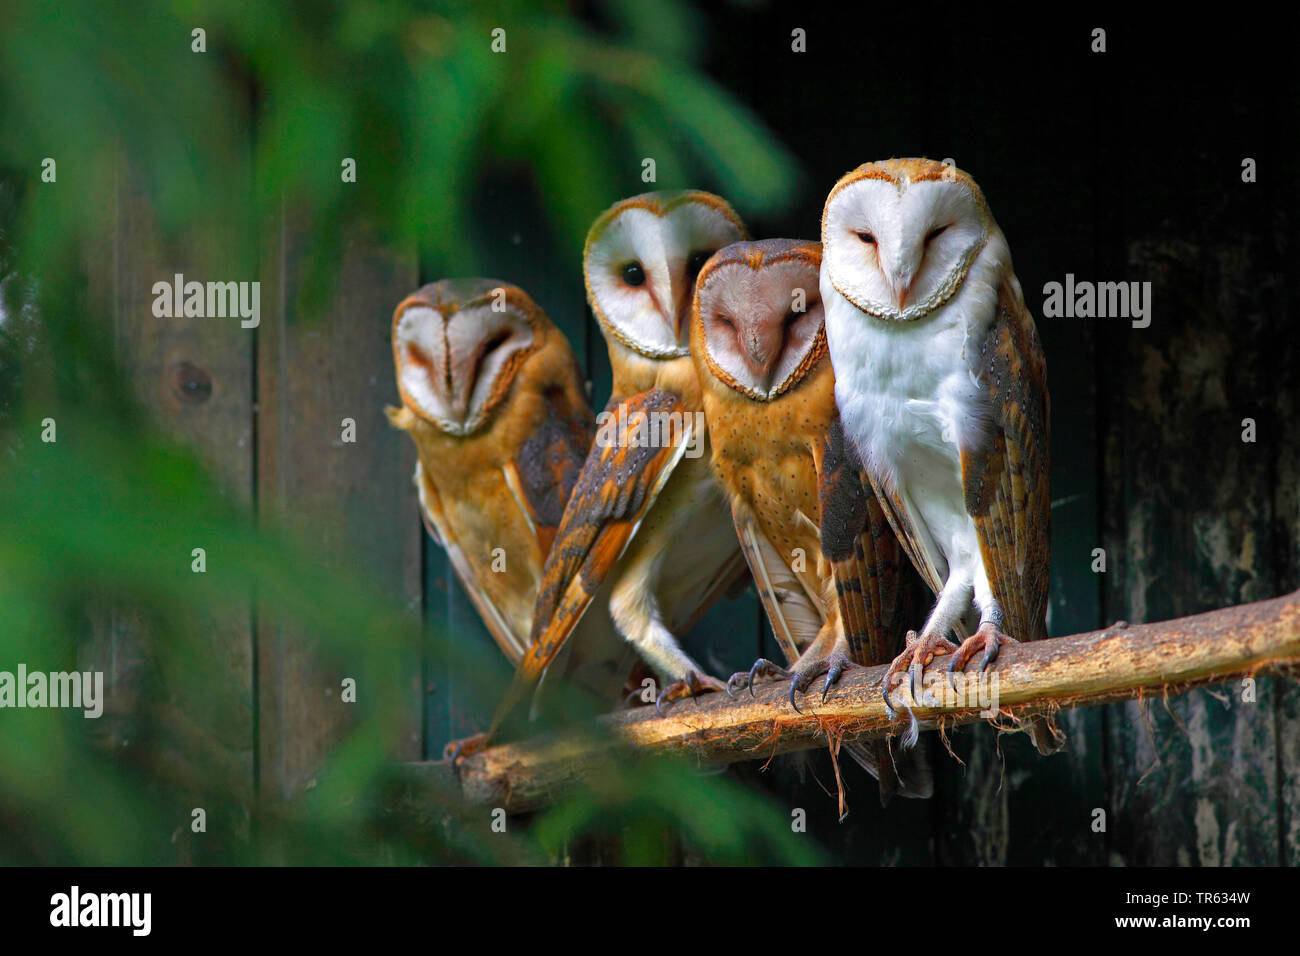 Barn owl (Tyto alba), four barn owls sitting together on a branch, Germany, Hesse Stock Photo